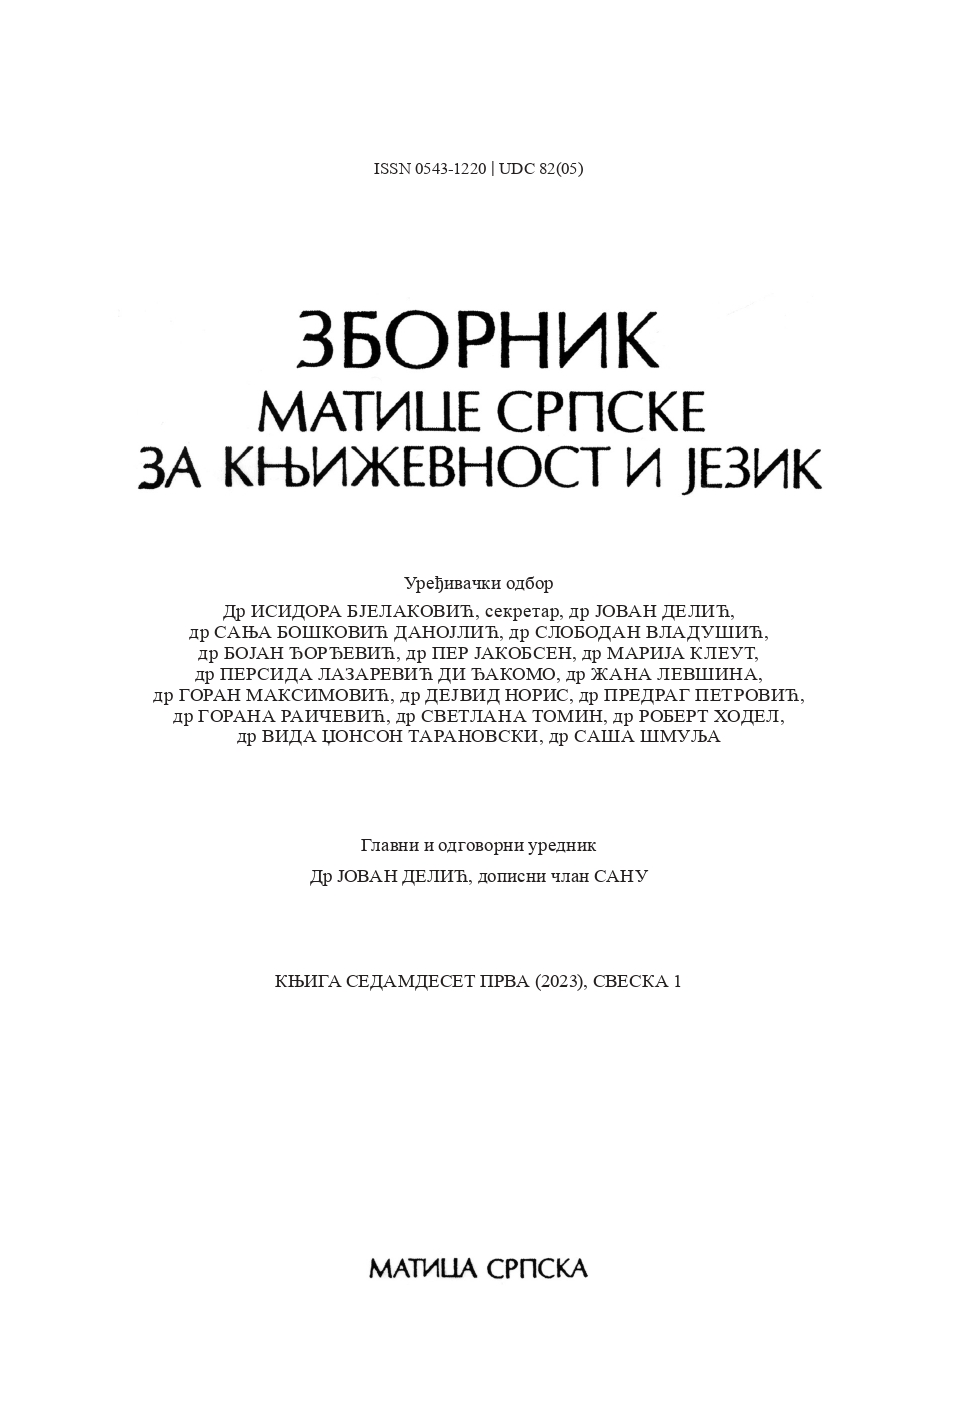 CULTURAL AND SPIRITUAL TREASURY OF THE SERBIAN ENLIGHTENMENT Cover Image